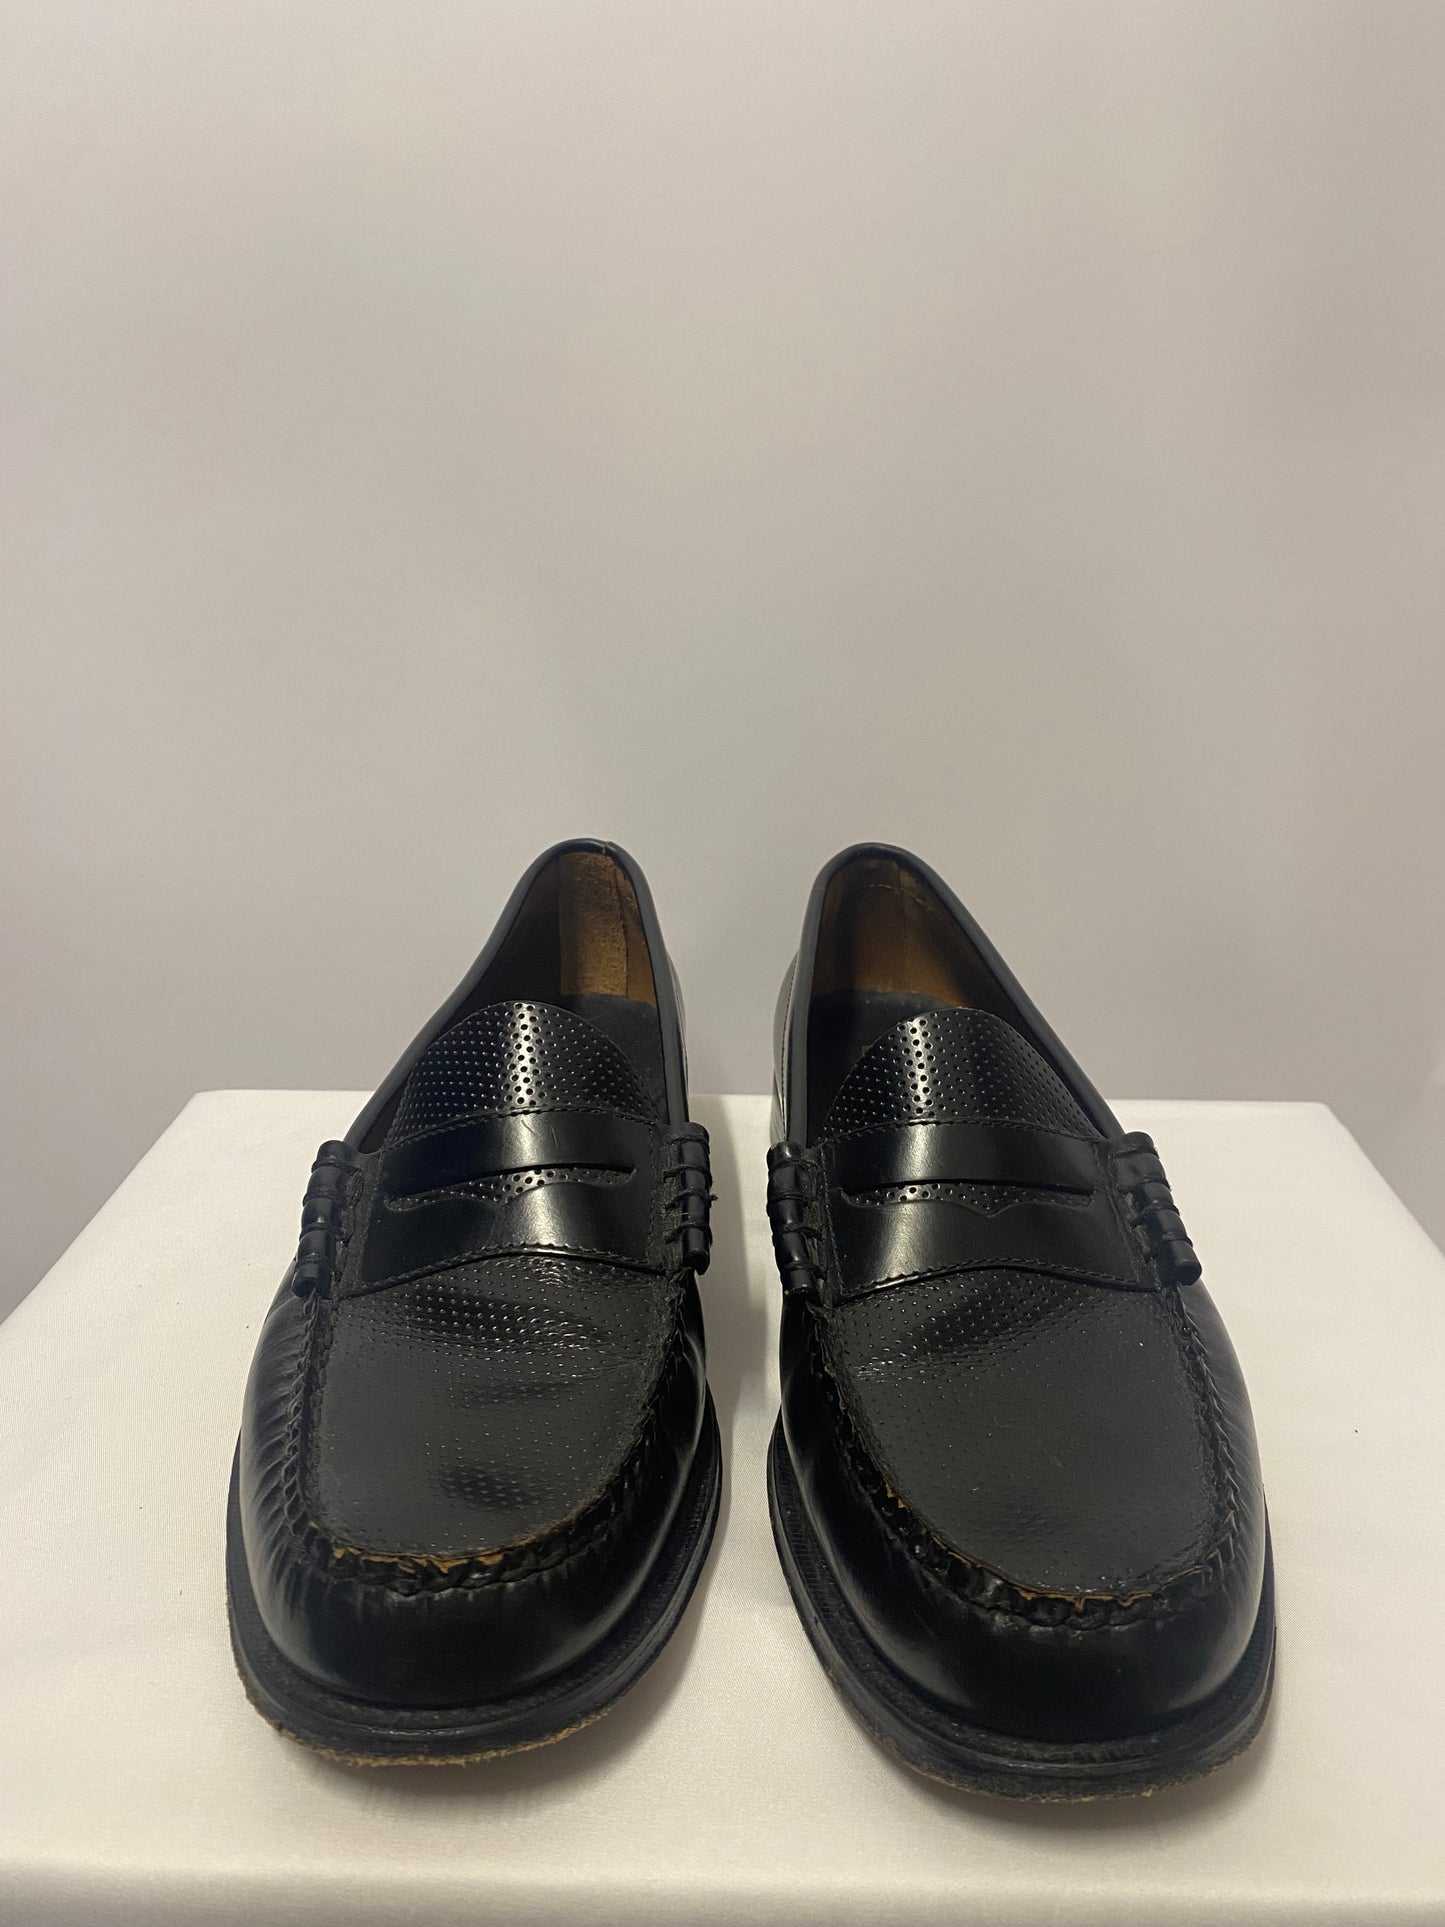 Weejun's The Original Penny Loafer Black Leather 10.5